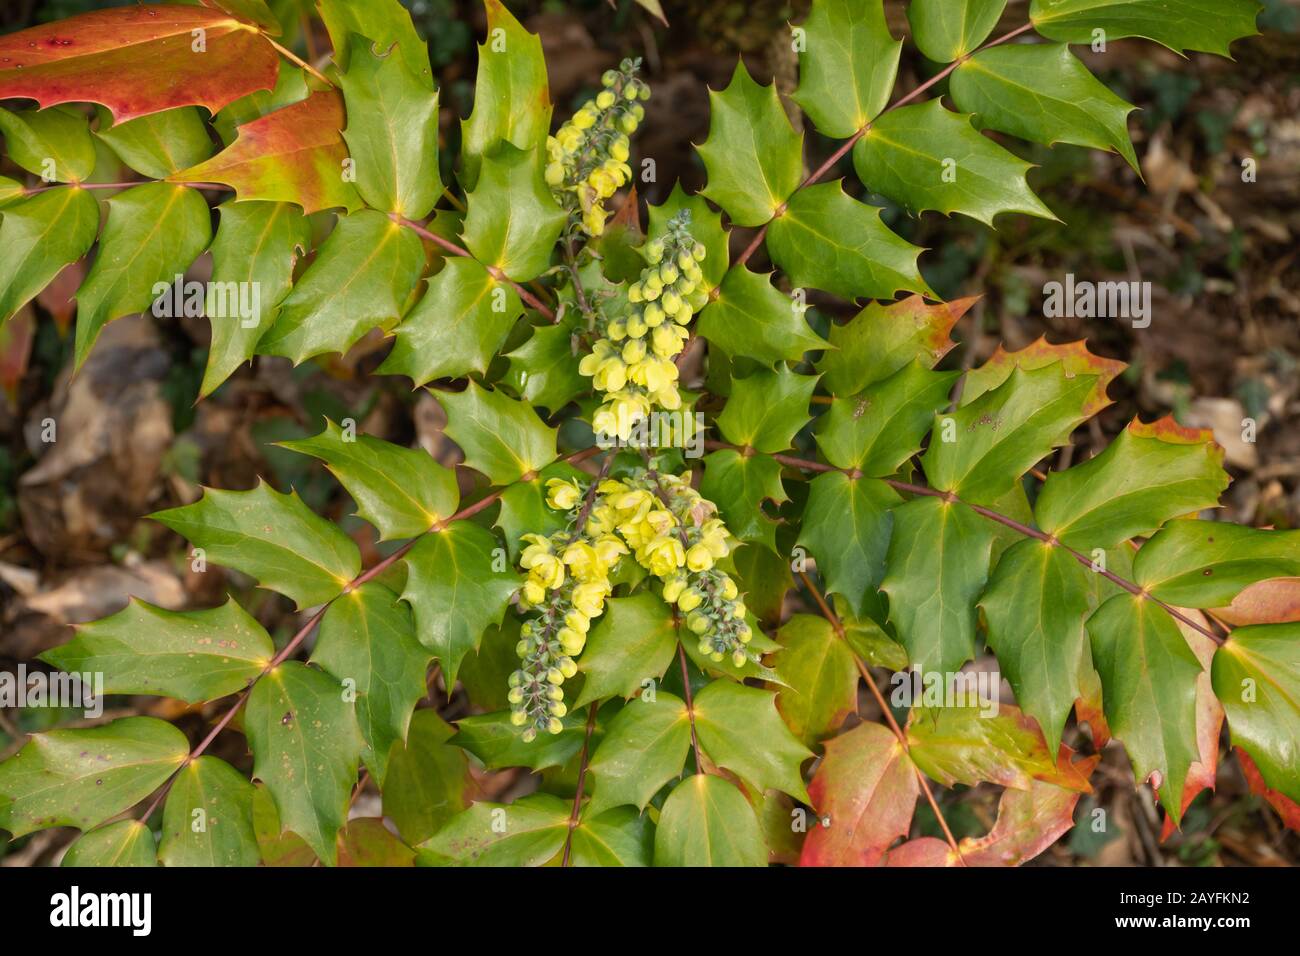 Mahonia bush flowering in February with colourful red leaves, UK Stock Photo